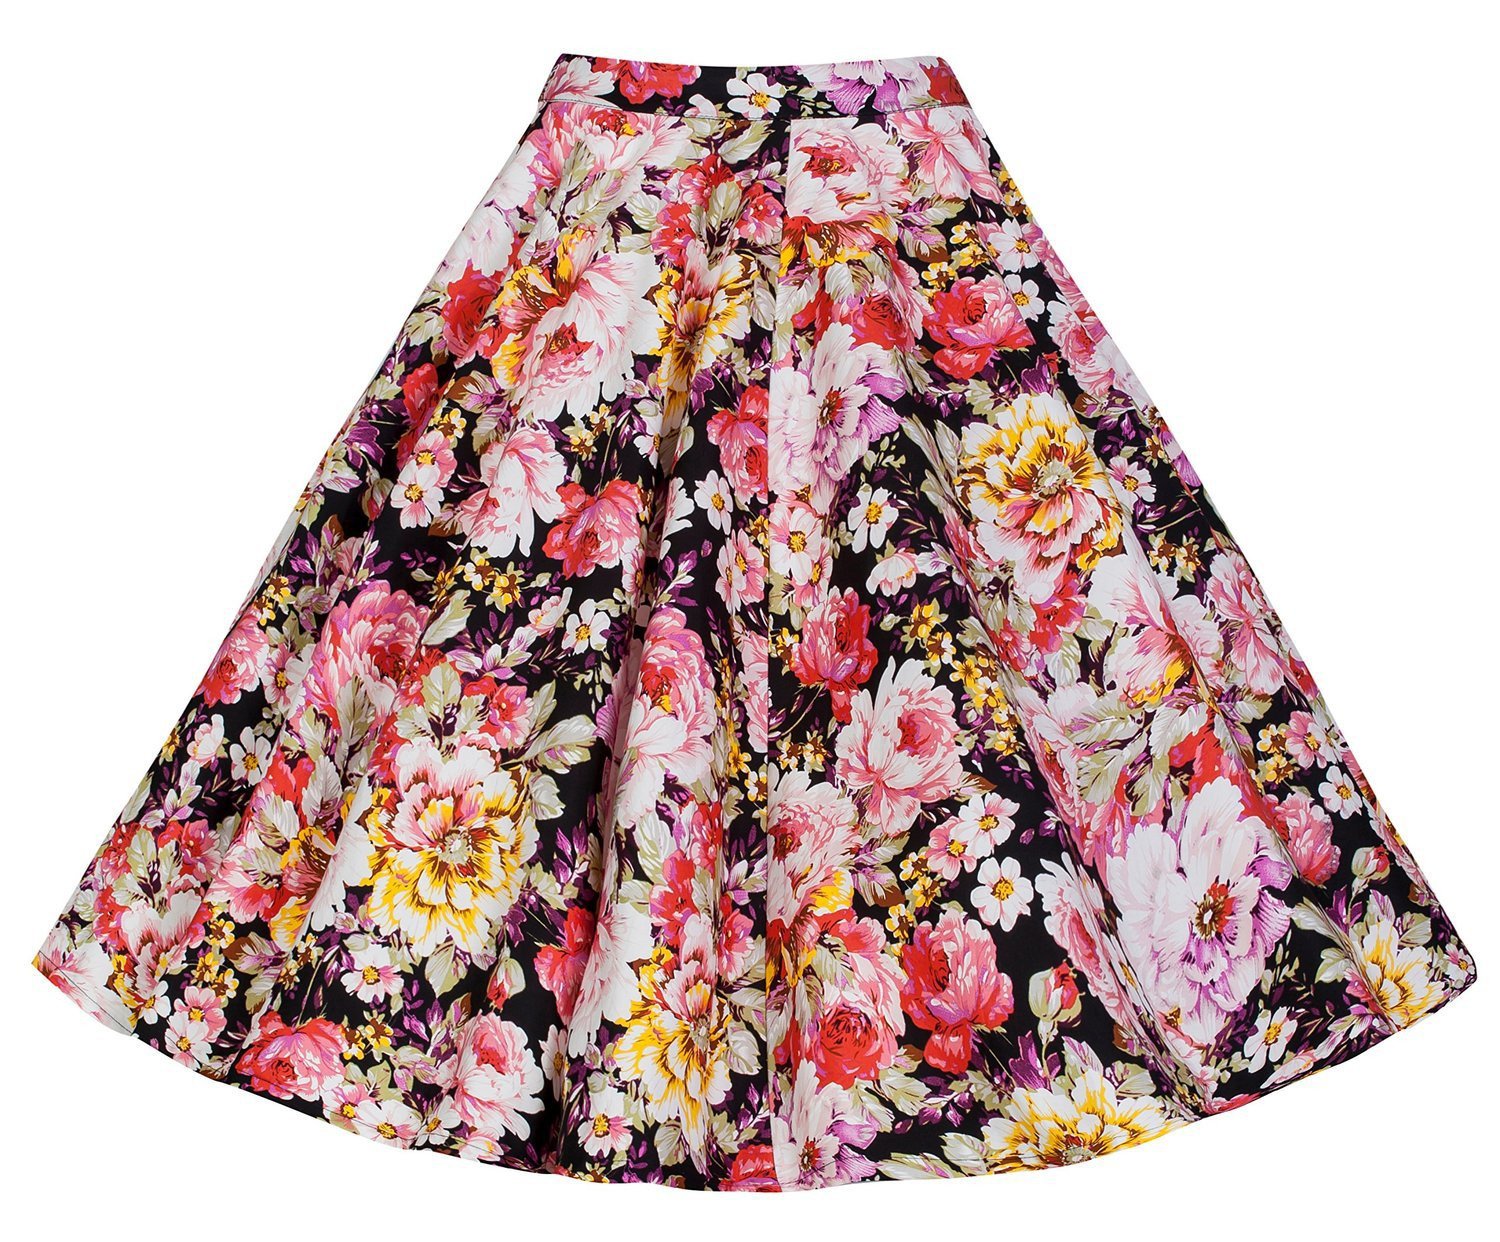 3D Flower Print Flare Ruffled Middle Skirt - Meet Yours Fashion - 9